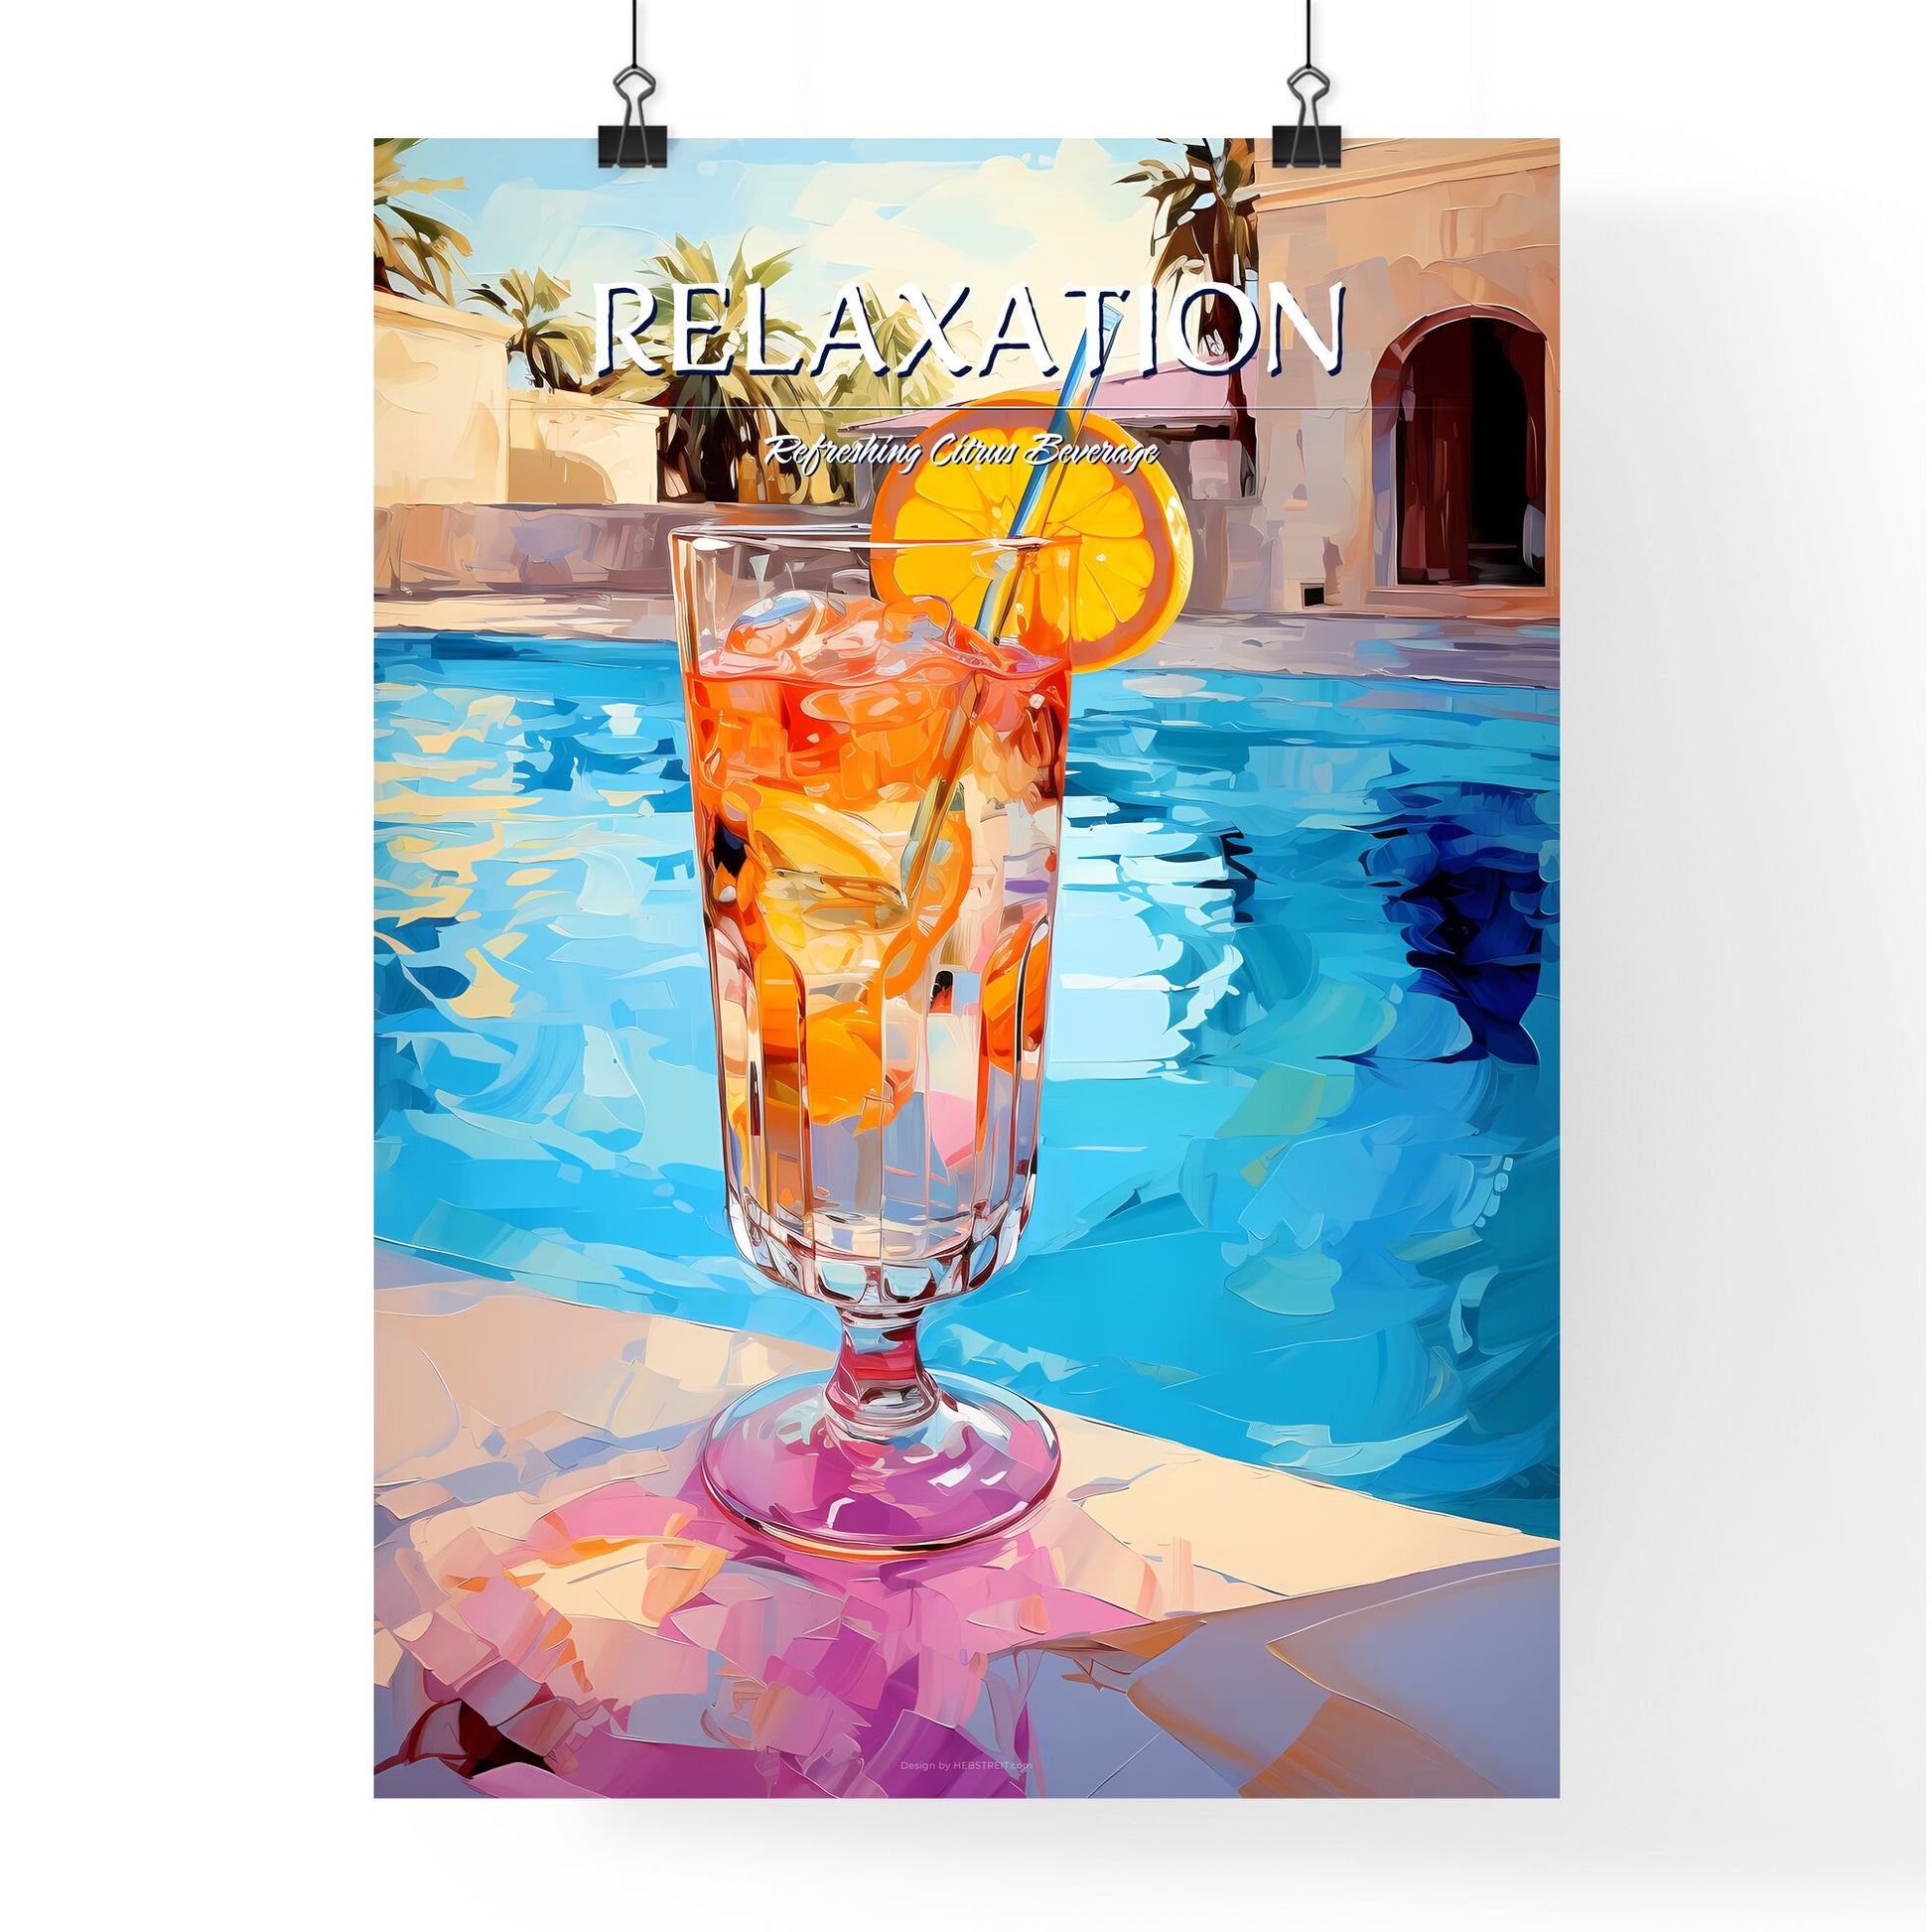 A Cocktail Near A Swimming Pool - Relax Concept - A Glass Of Liquid With Orange Slices And A Straw Default Title